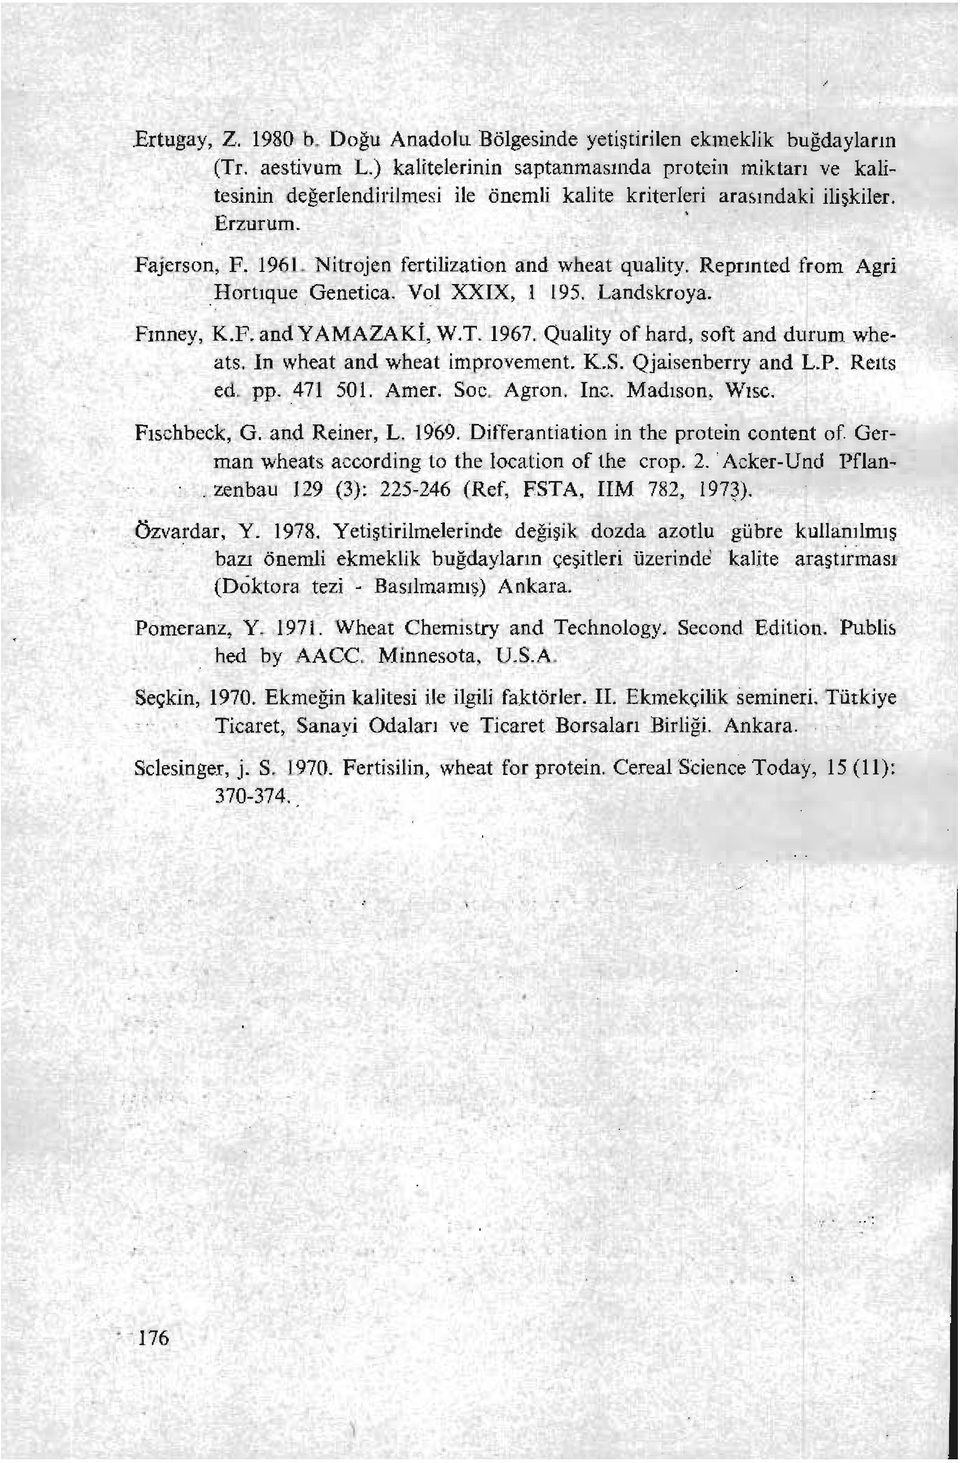 Reprınted from Agri Hortıque Genetica. Vol XXIX, 1 195. Landskroya. Fınney, K.F. and YAMAZAKİ,W.T. 1967. Quality of hard, soft and durum wheats. in wheat and wheat improvement. K.S.